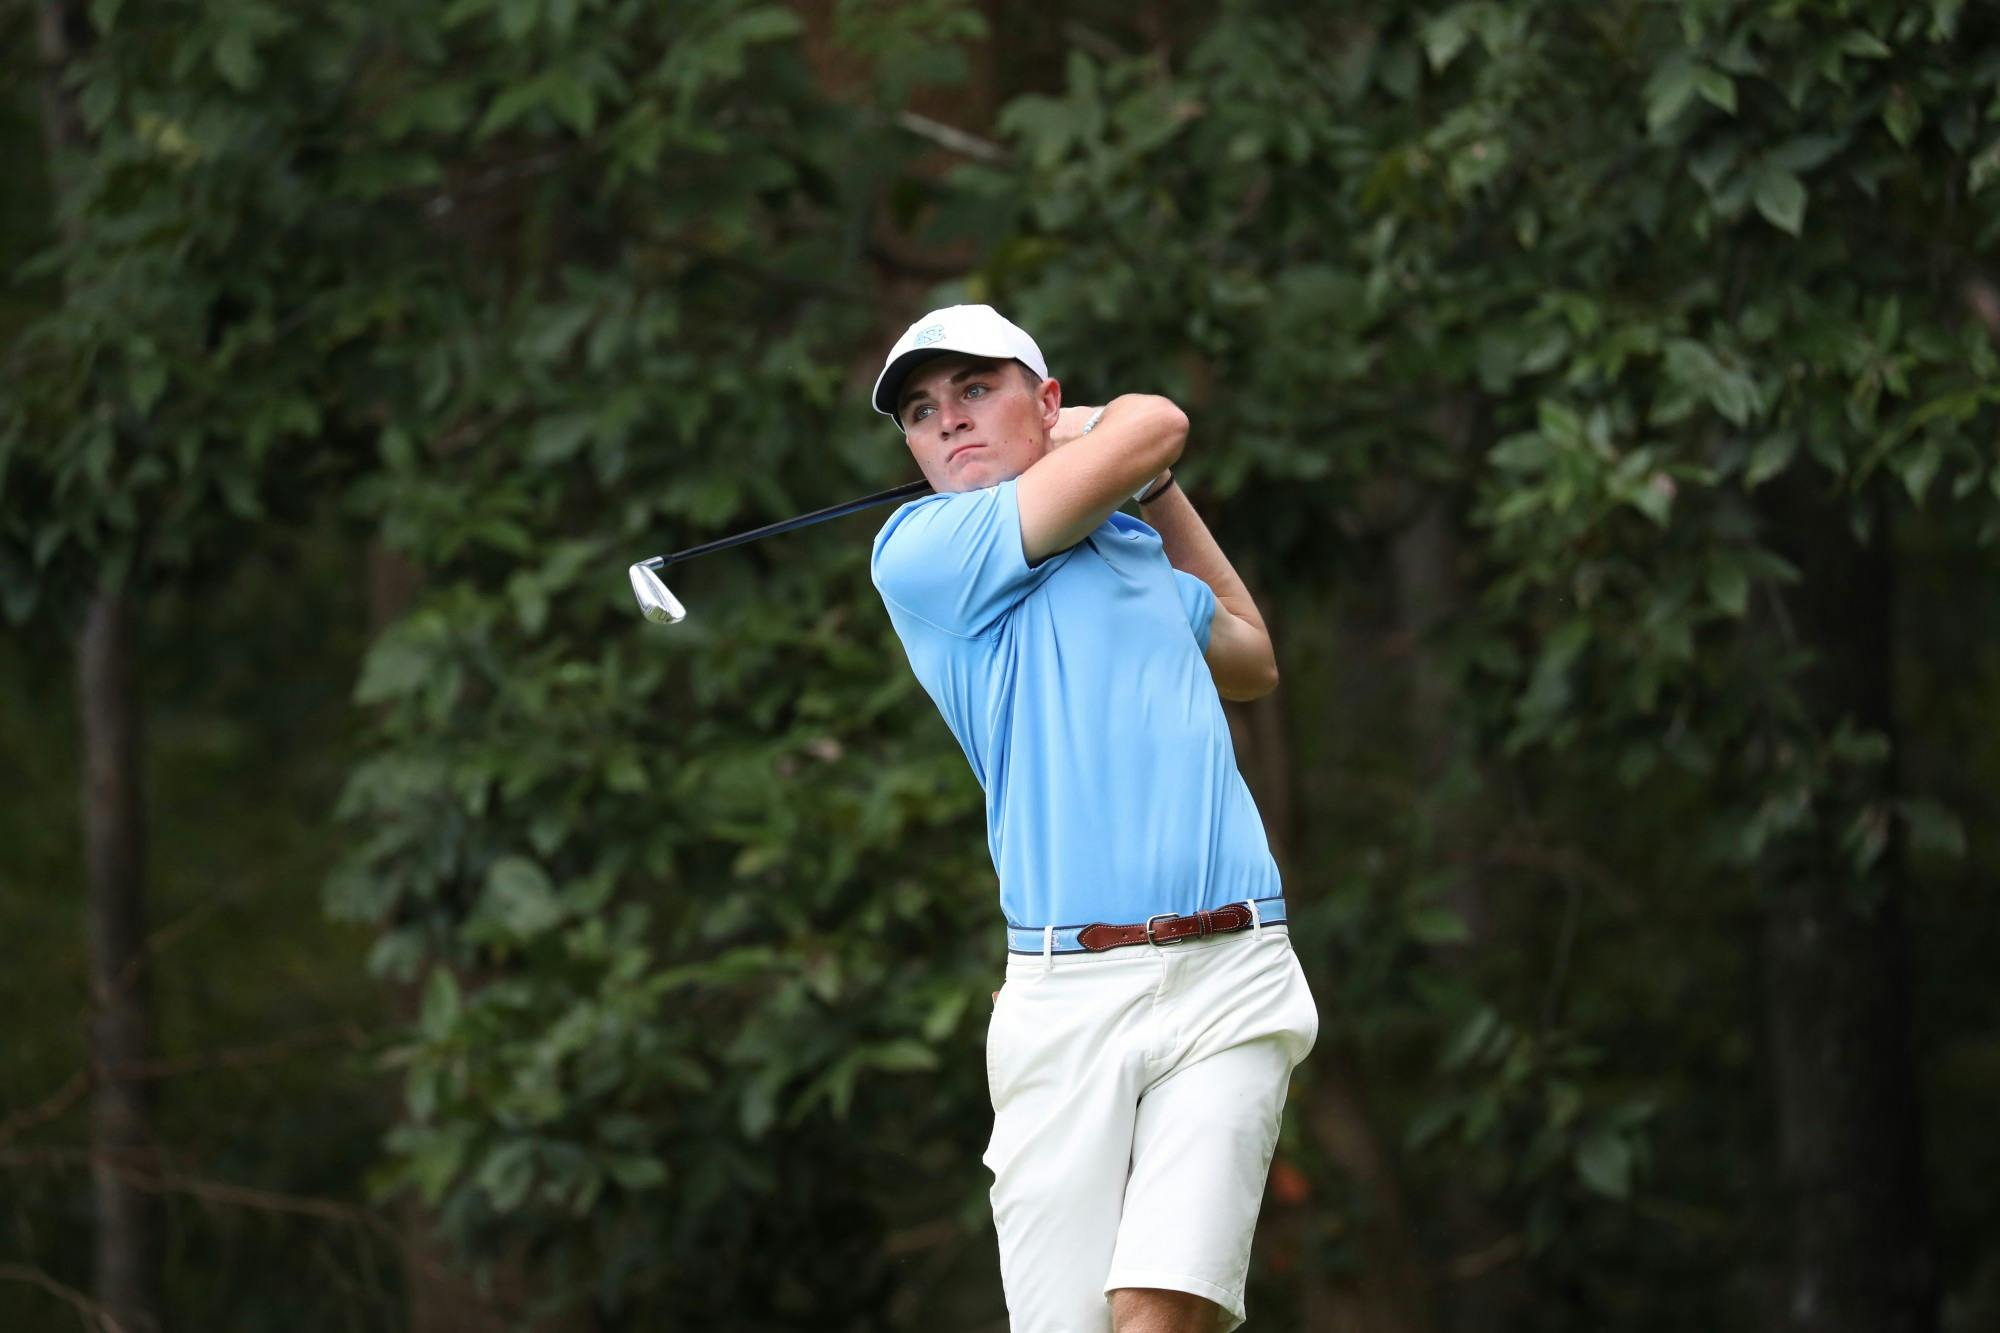 UNC mens golf athlete Austin Greaser competing in the 2022 Masters picture